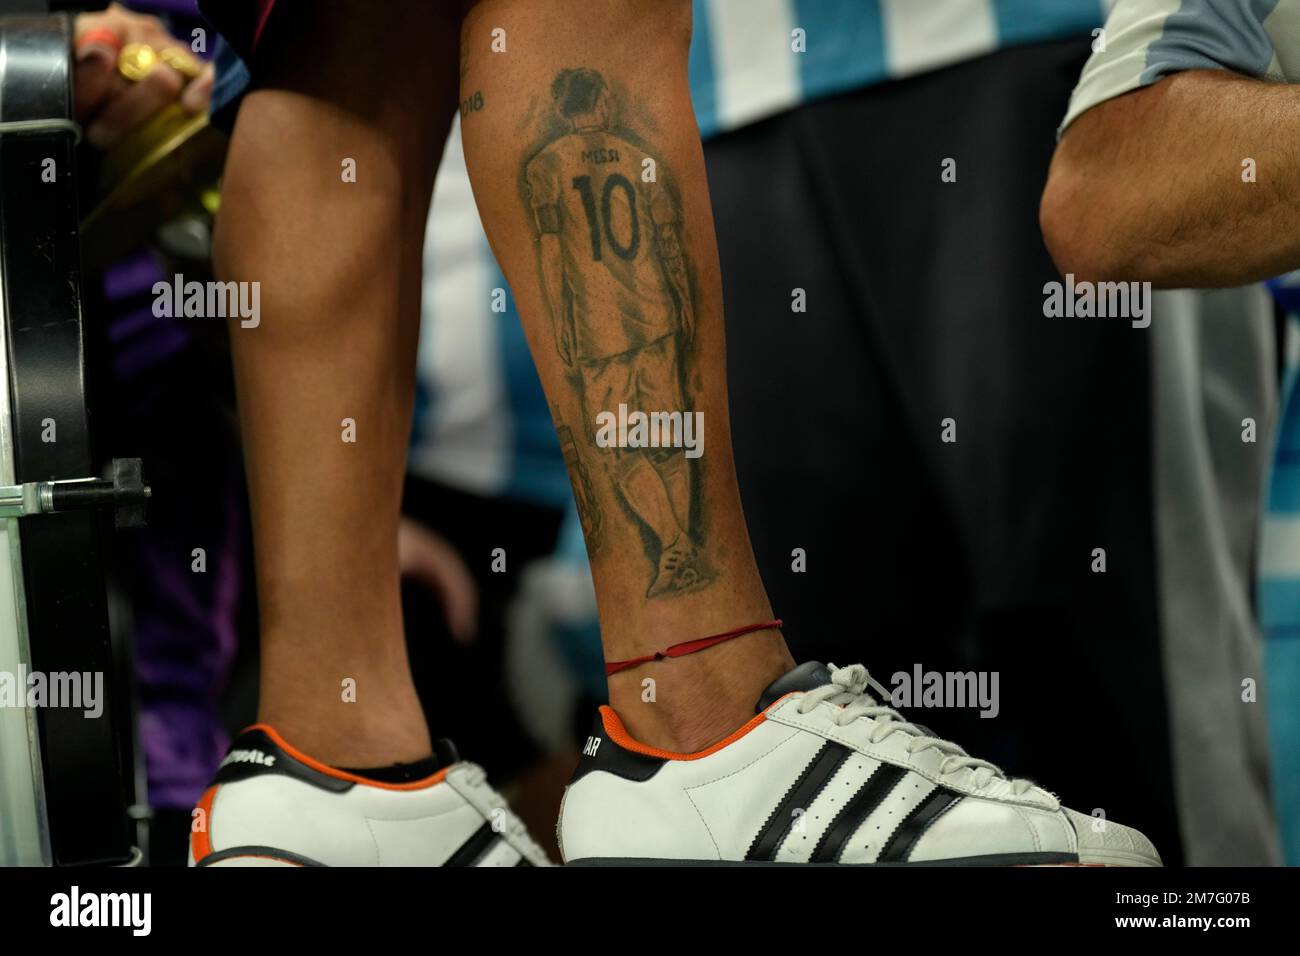 Messi Tattoos Fanatic Lionel Messi fans go skin deep in Argentine heros  tattoos artists struggle to make up for soaring demand Check OUT